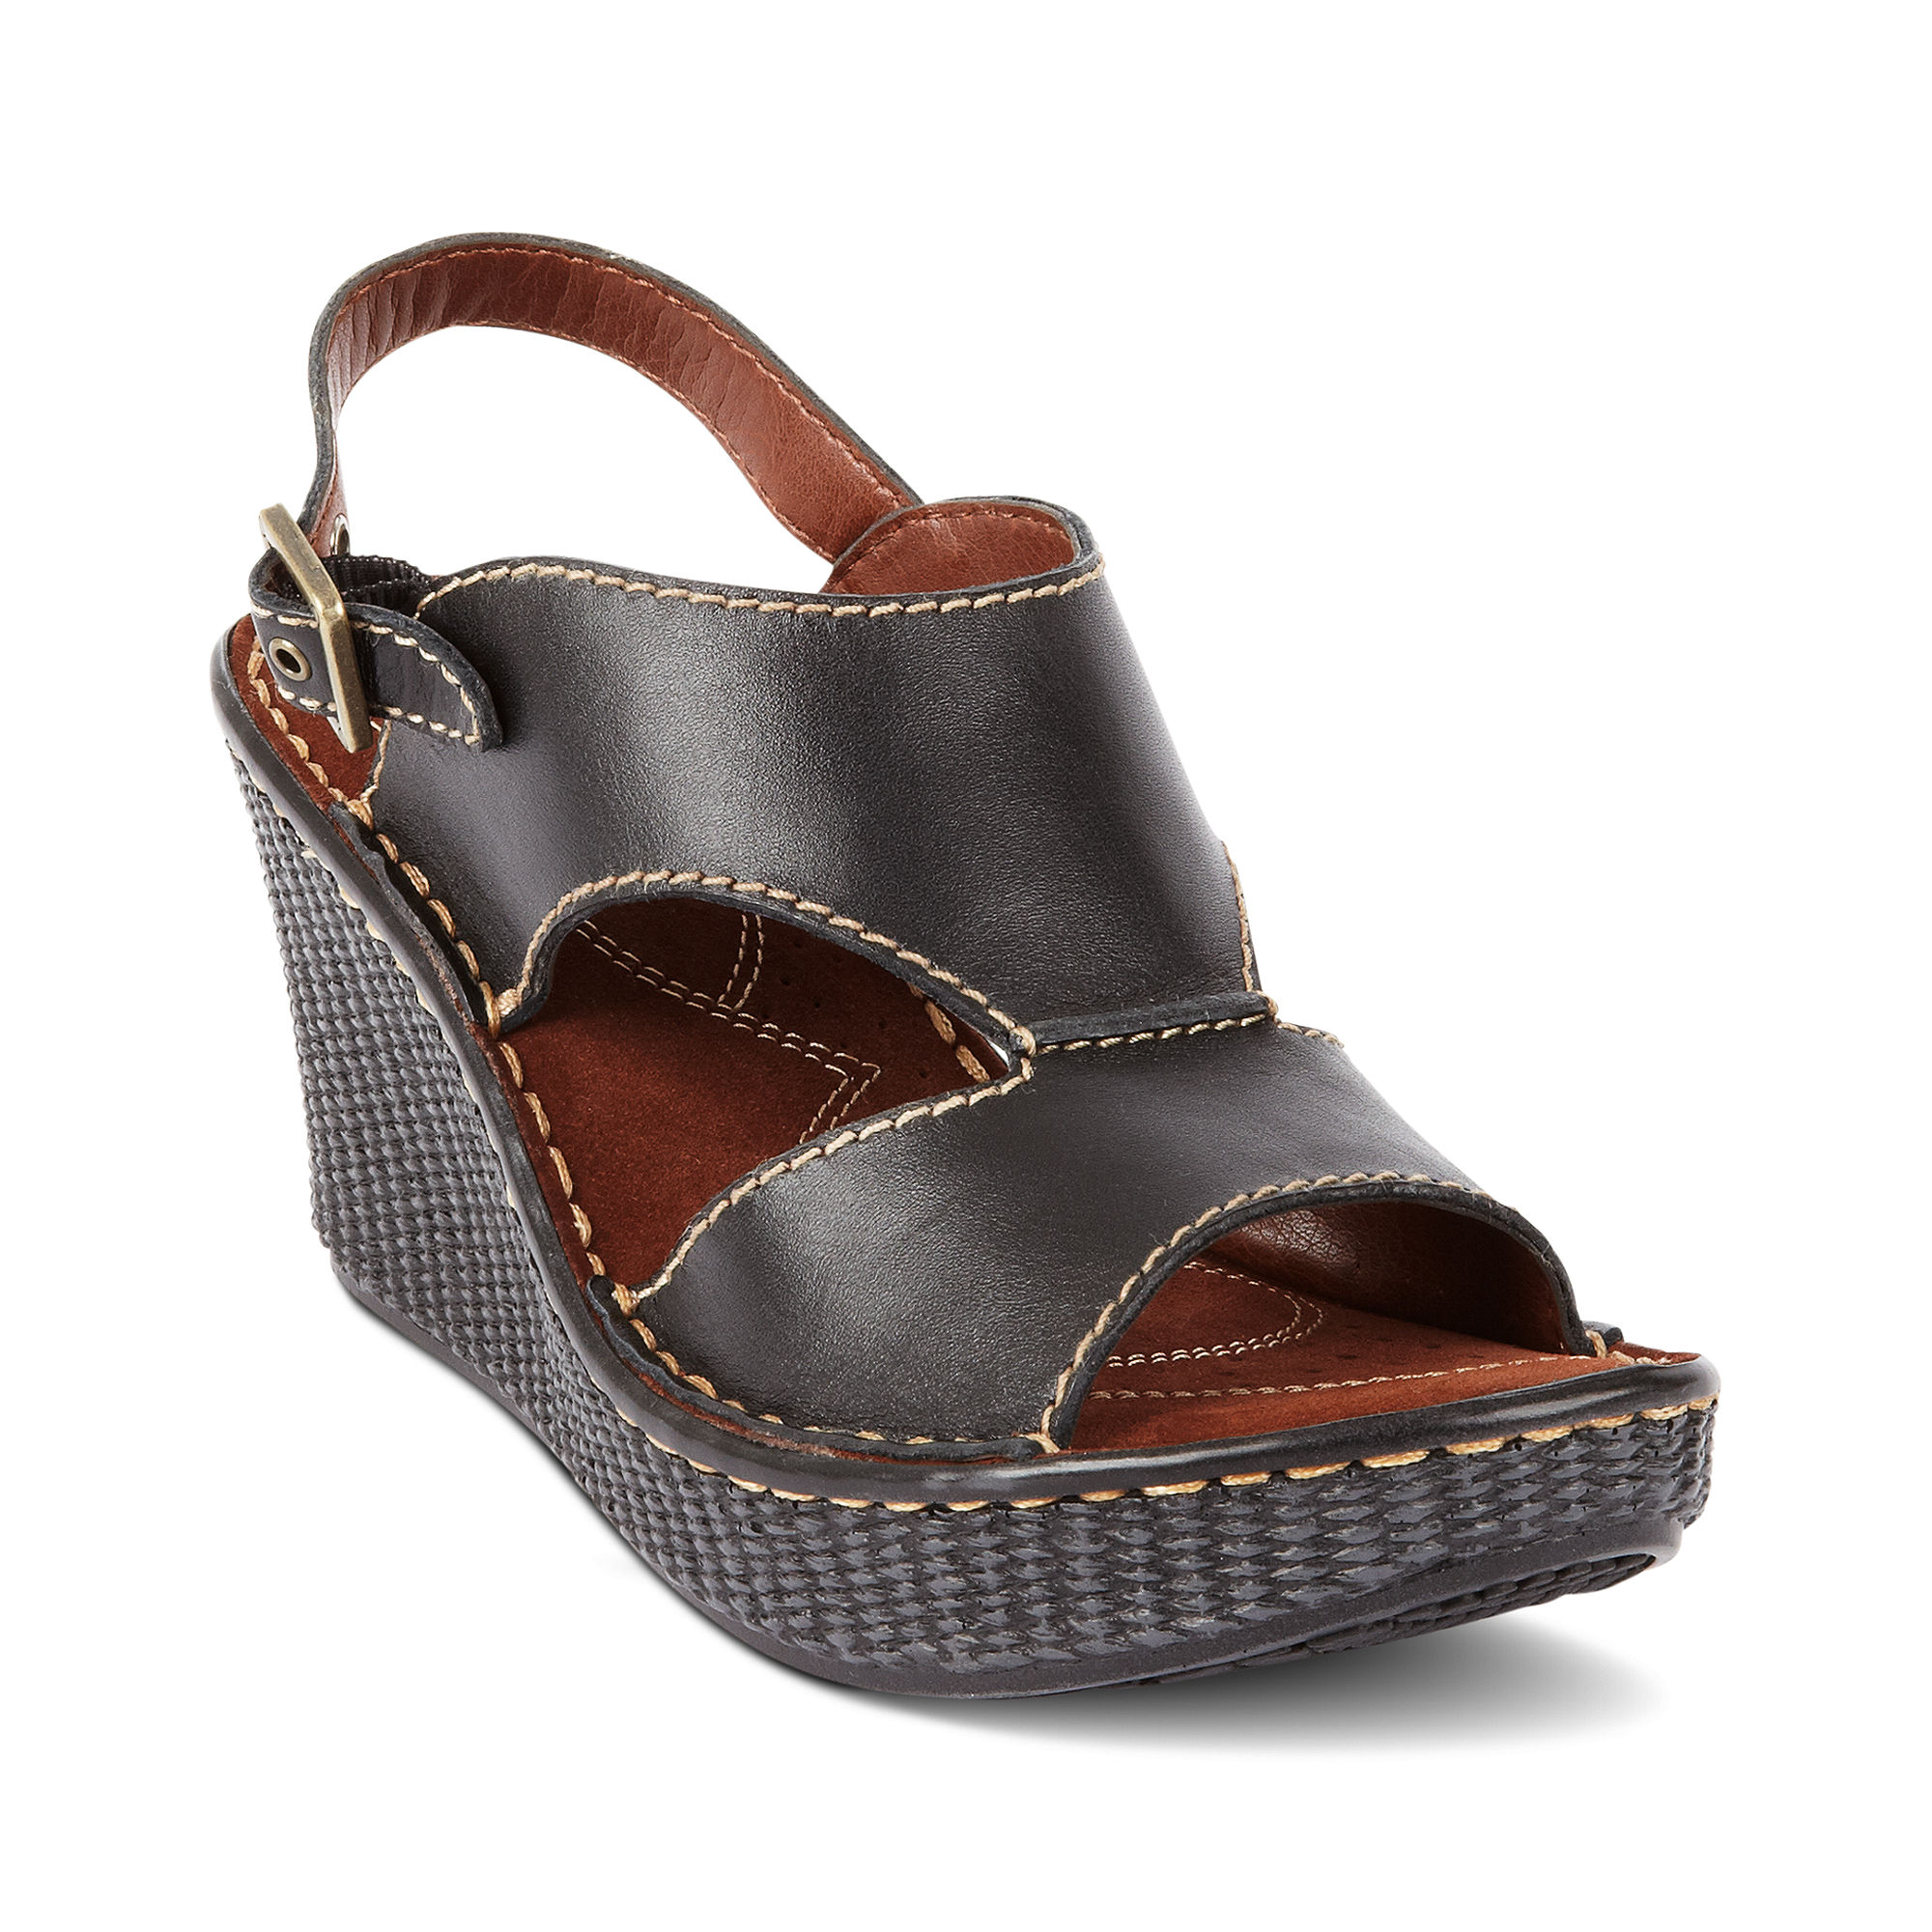 Hush puppies' danube sling sandals feature a woven wedge heel and slip ...